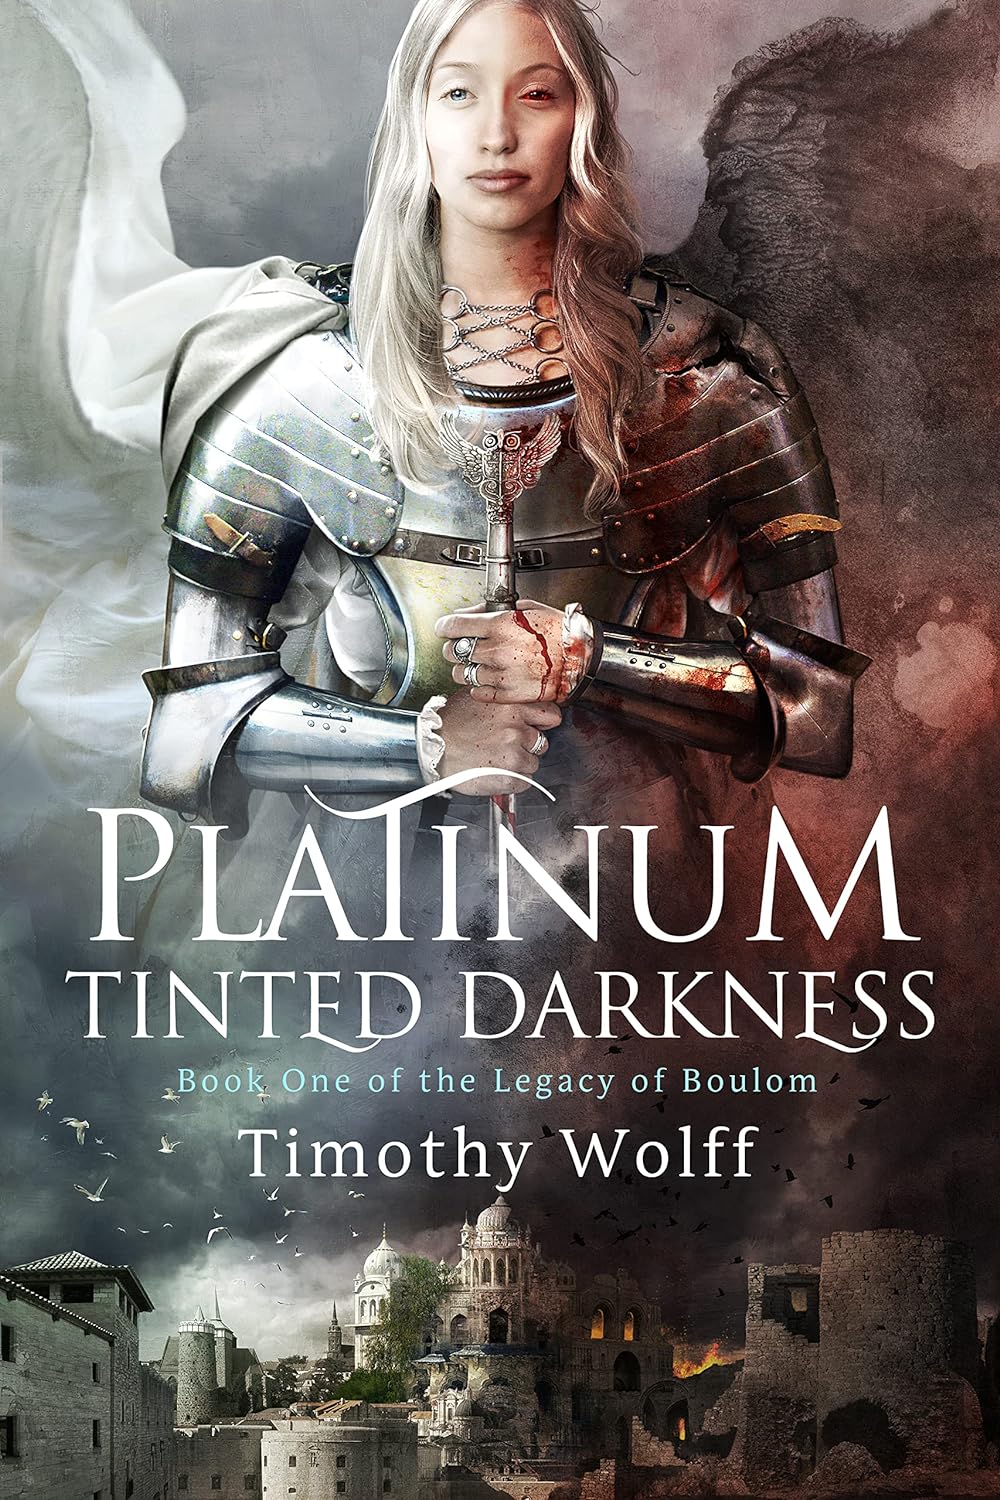 The cover of "Platinum Tinted Darkness". It features a young, blond woman wearing shining armor, with a backdrop that can be either clouds or smoke, but half of her is well lit and has a white, angelic wing, and the other one is partially in shade and has a black, crumbling wing. At the bottom, there is a city in ruins.